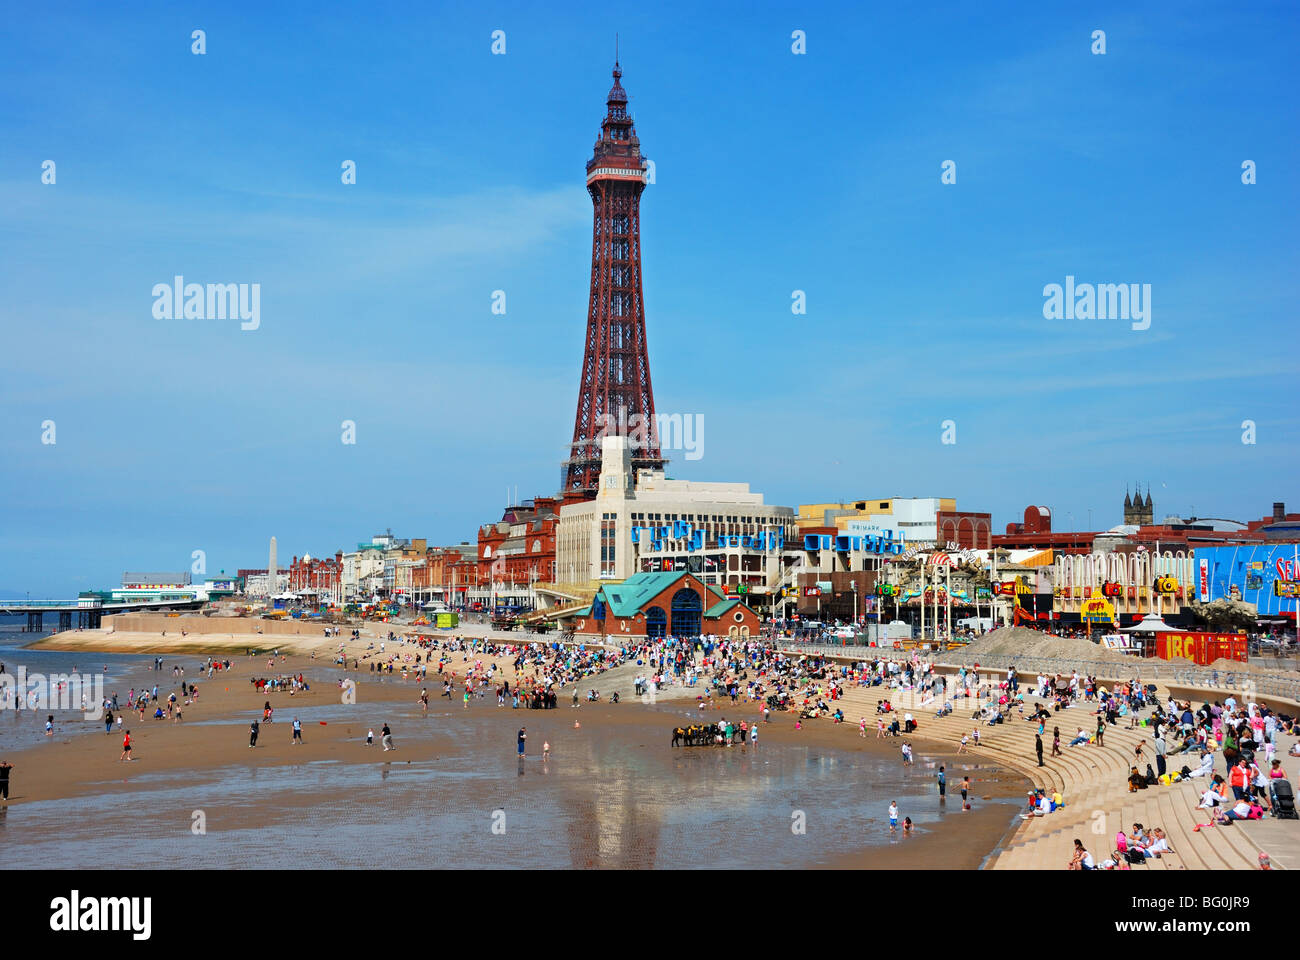 Blackpool, English seaside resort, showing beach (including donkey rides) and Blackpool Tower Stock Photo